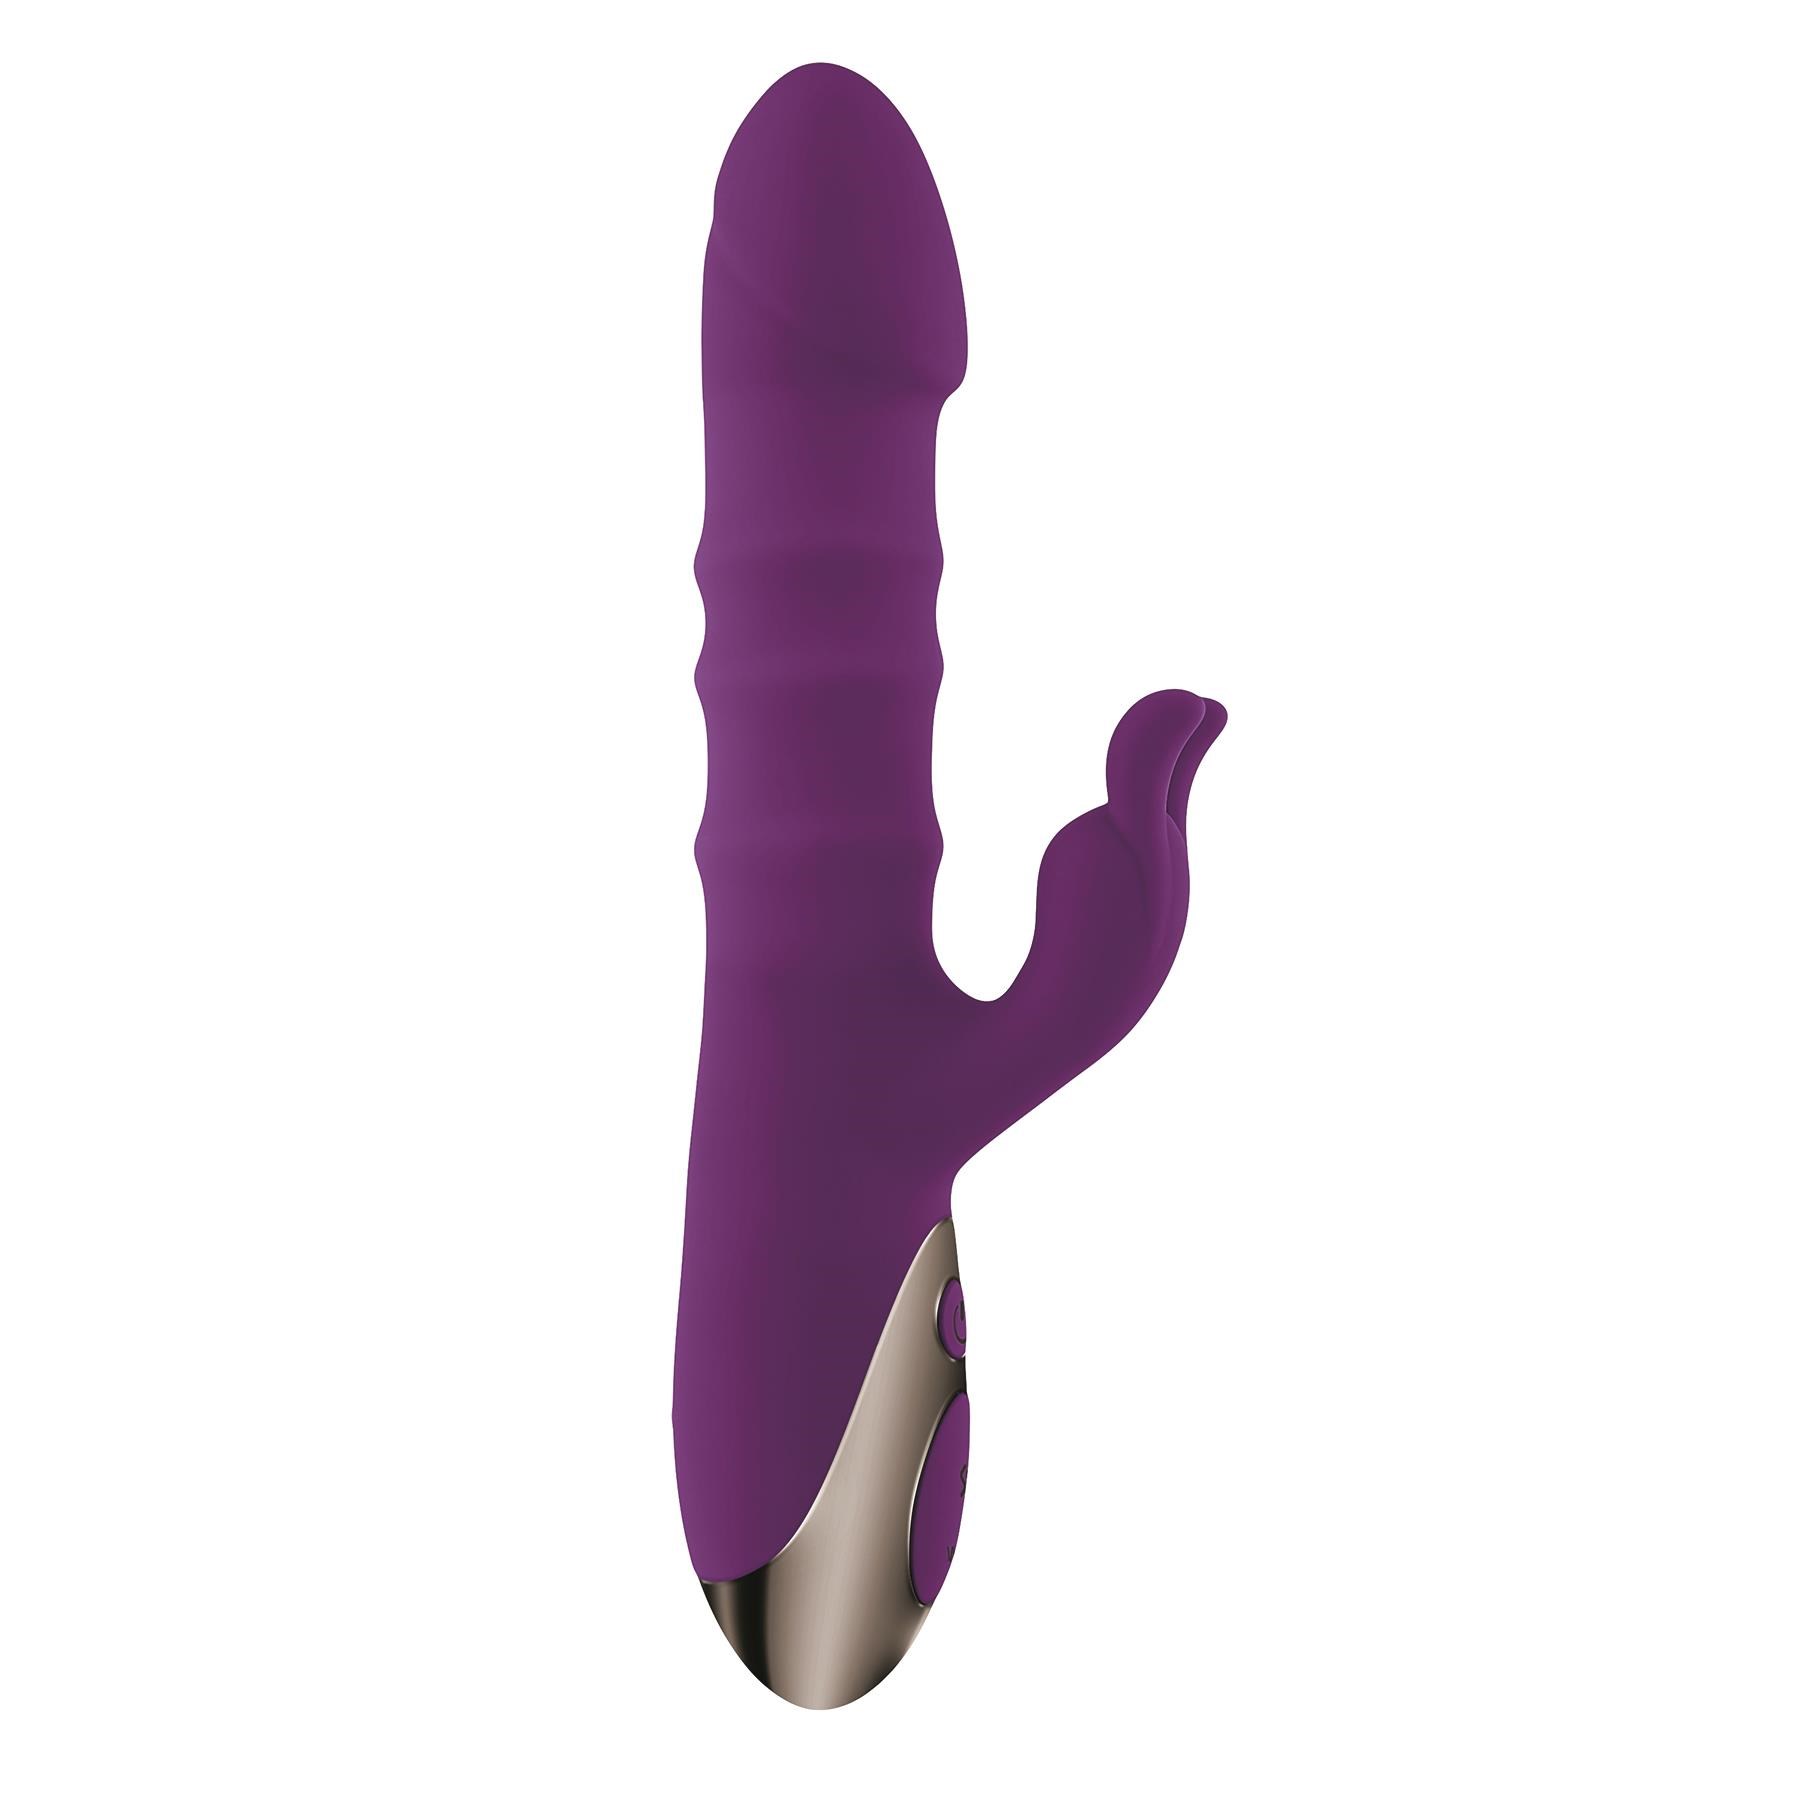 Playboy Pleasure Hop To It Rabbit Massager With Rolling Rings-Product Shot #1